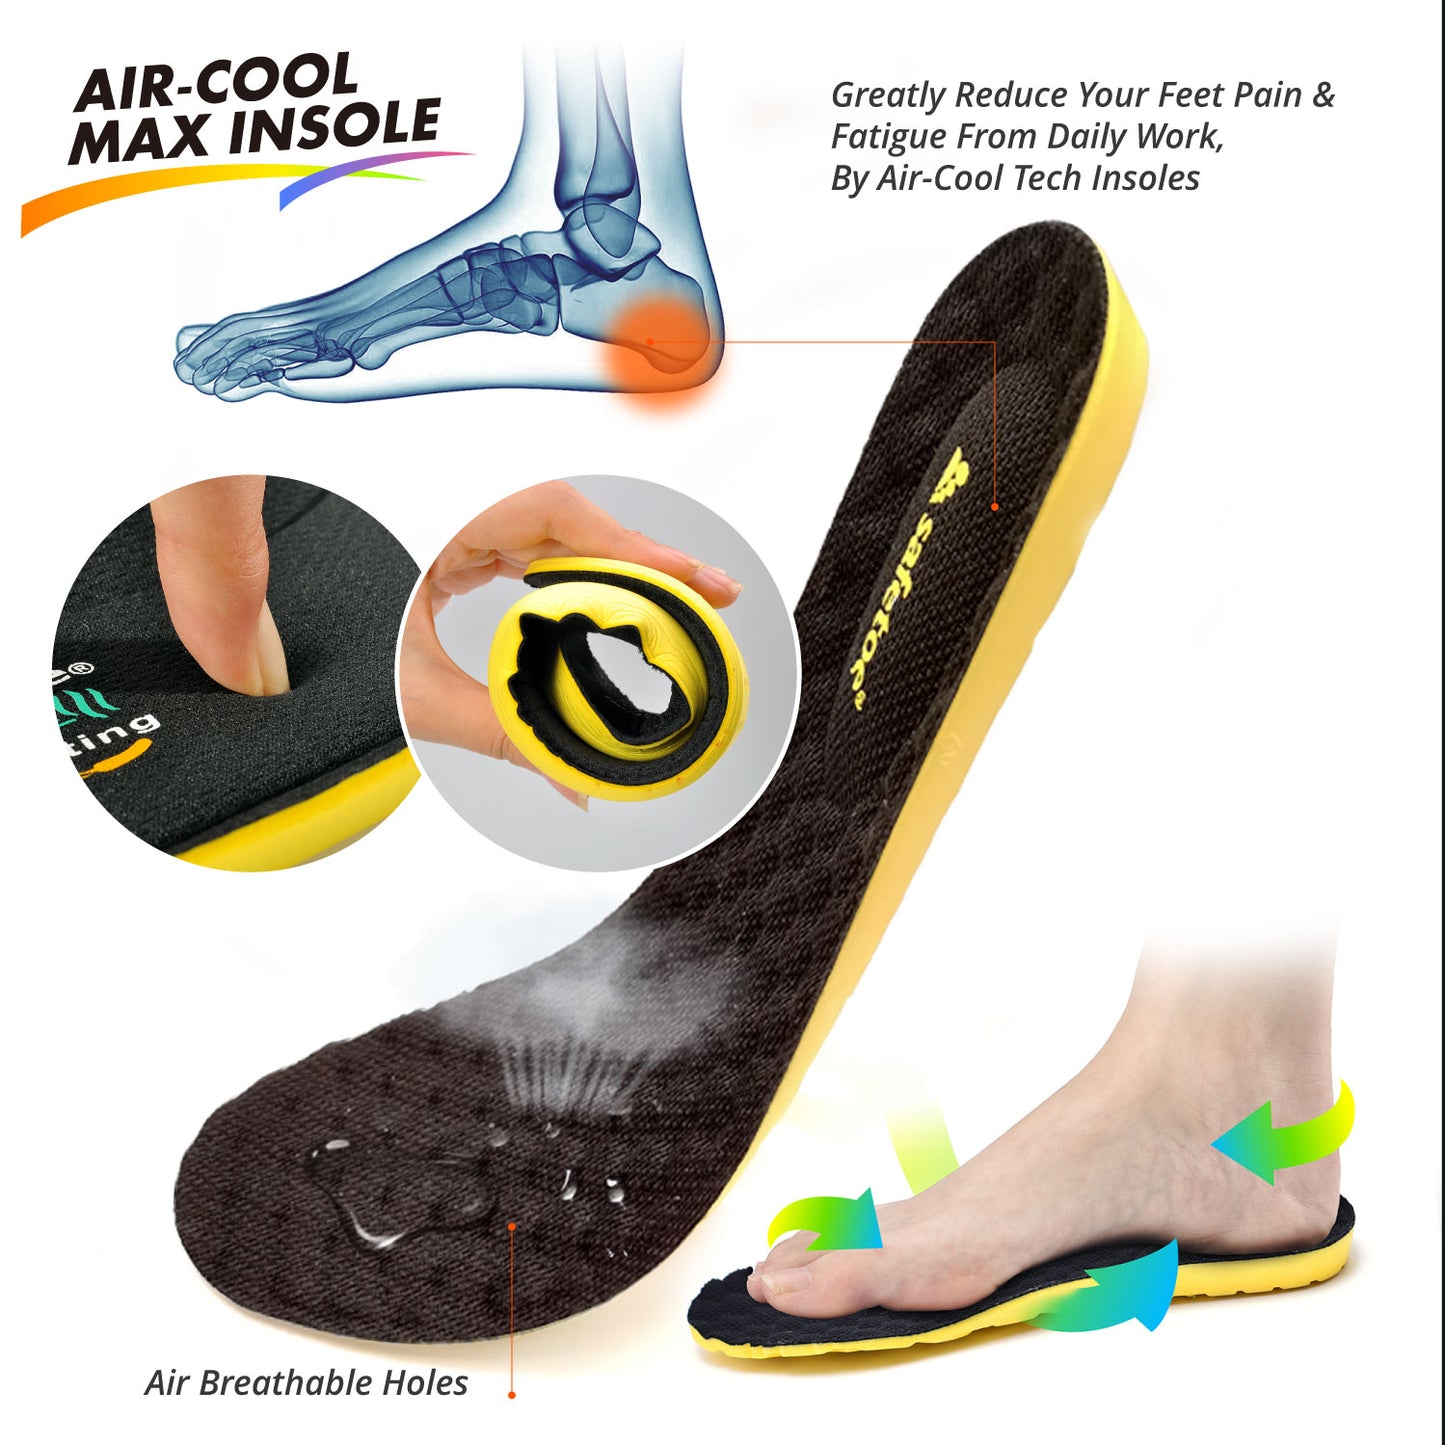 Contrail GN 4E Wide Fit Safety Shoes